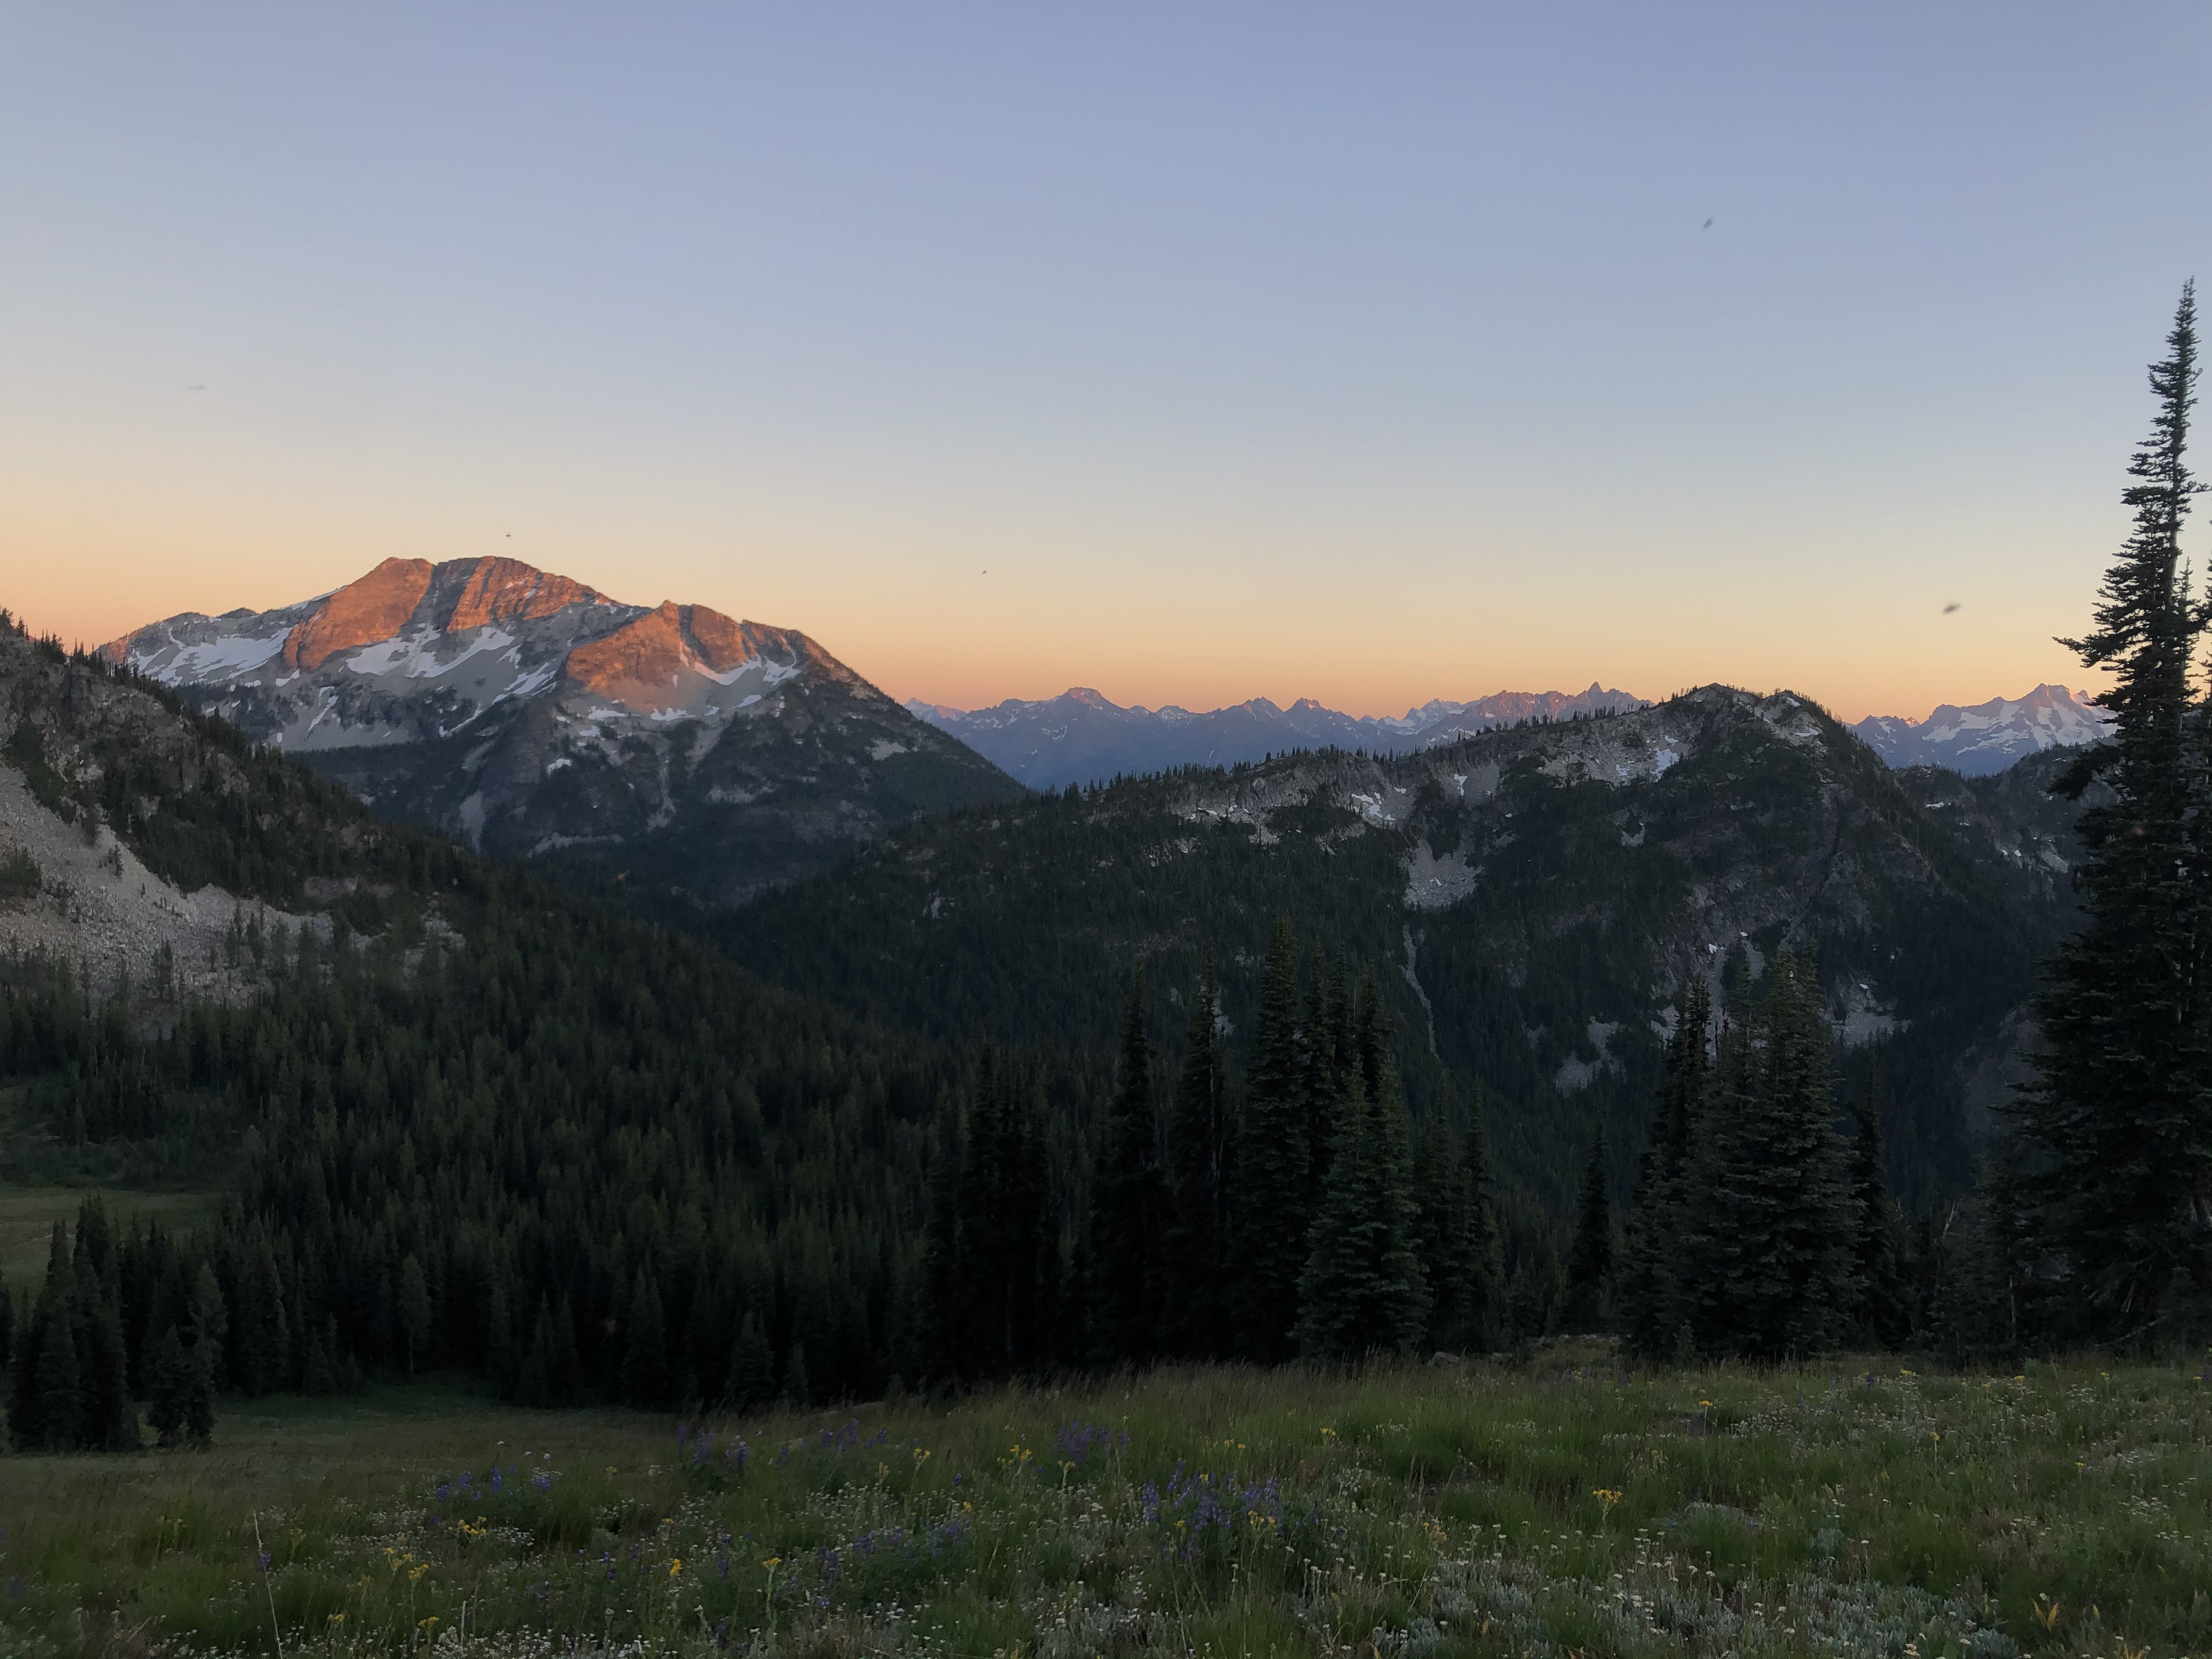 A mountain range is lit up from behind by a sunset fading from an orange to blue sky at the top of the photo. 